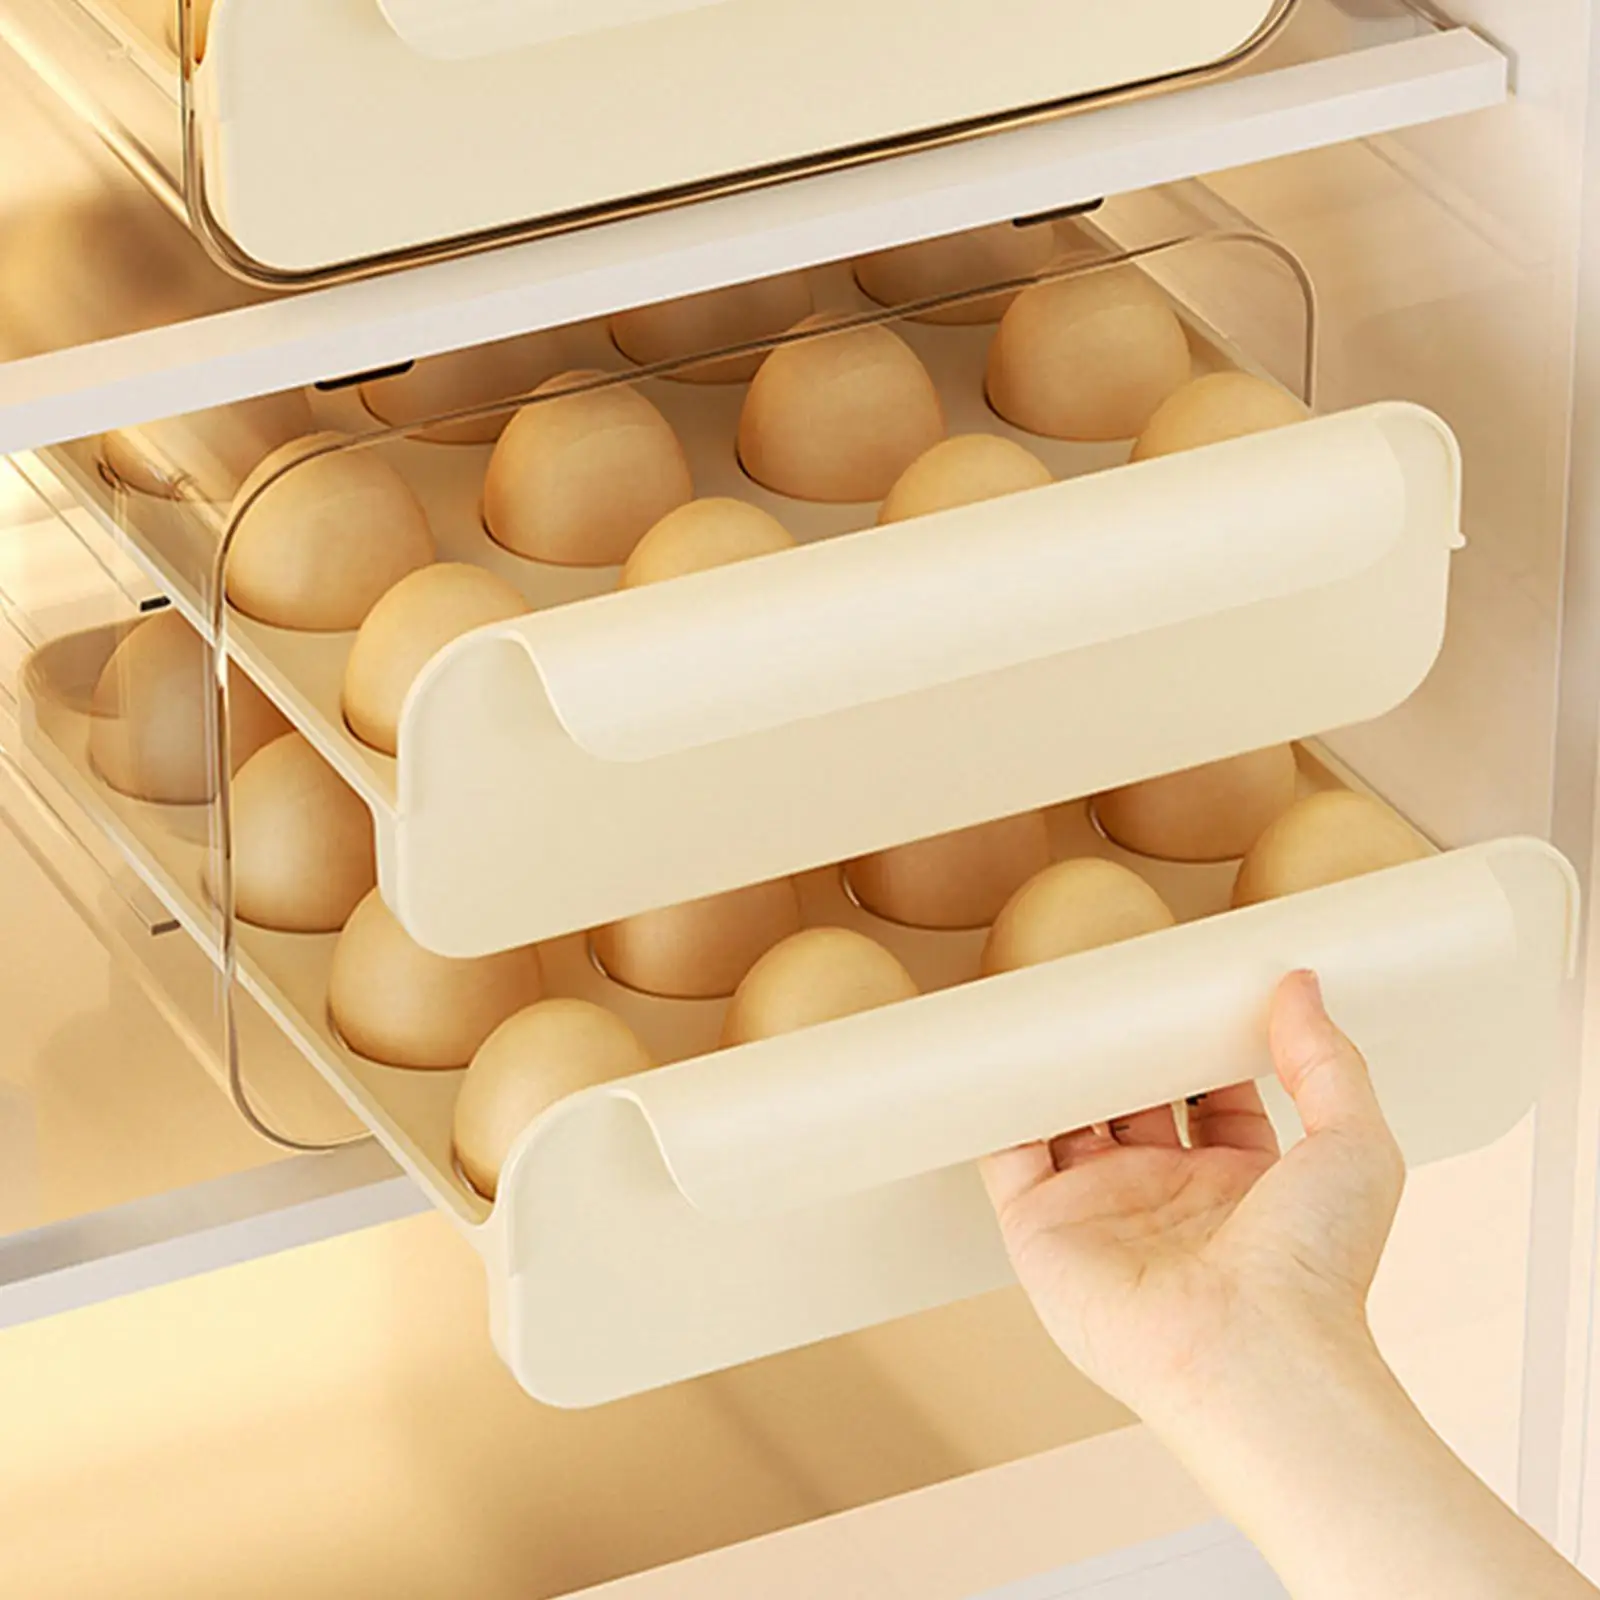 Eggs Organizer Drawer Large Capacity Double Layers Eggs Container Egg Holder for Pantry Cupboard Cabinet Countertop Refrigerator